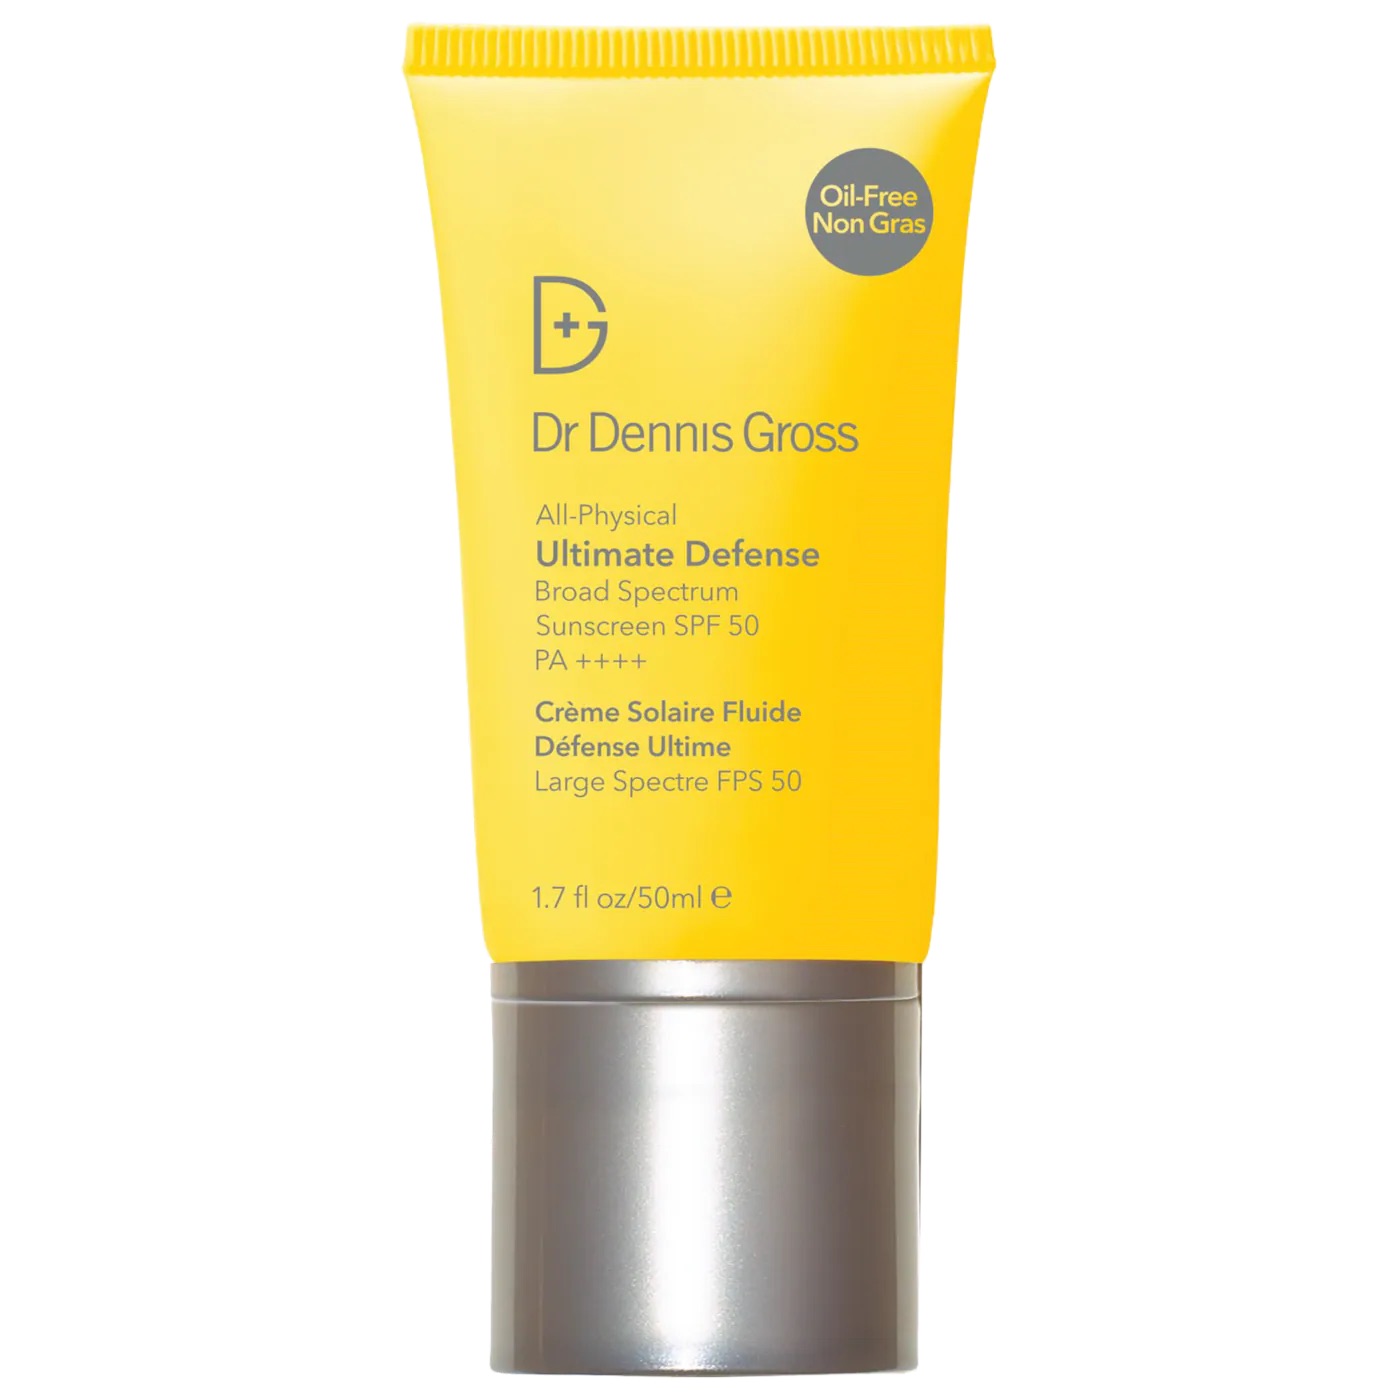 Dr Dennis Gross All-Physical Ultimate Defense Broad Spectrum Sunscreen SPF 50 PA++++